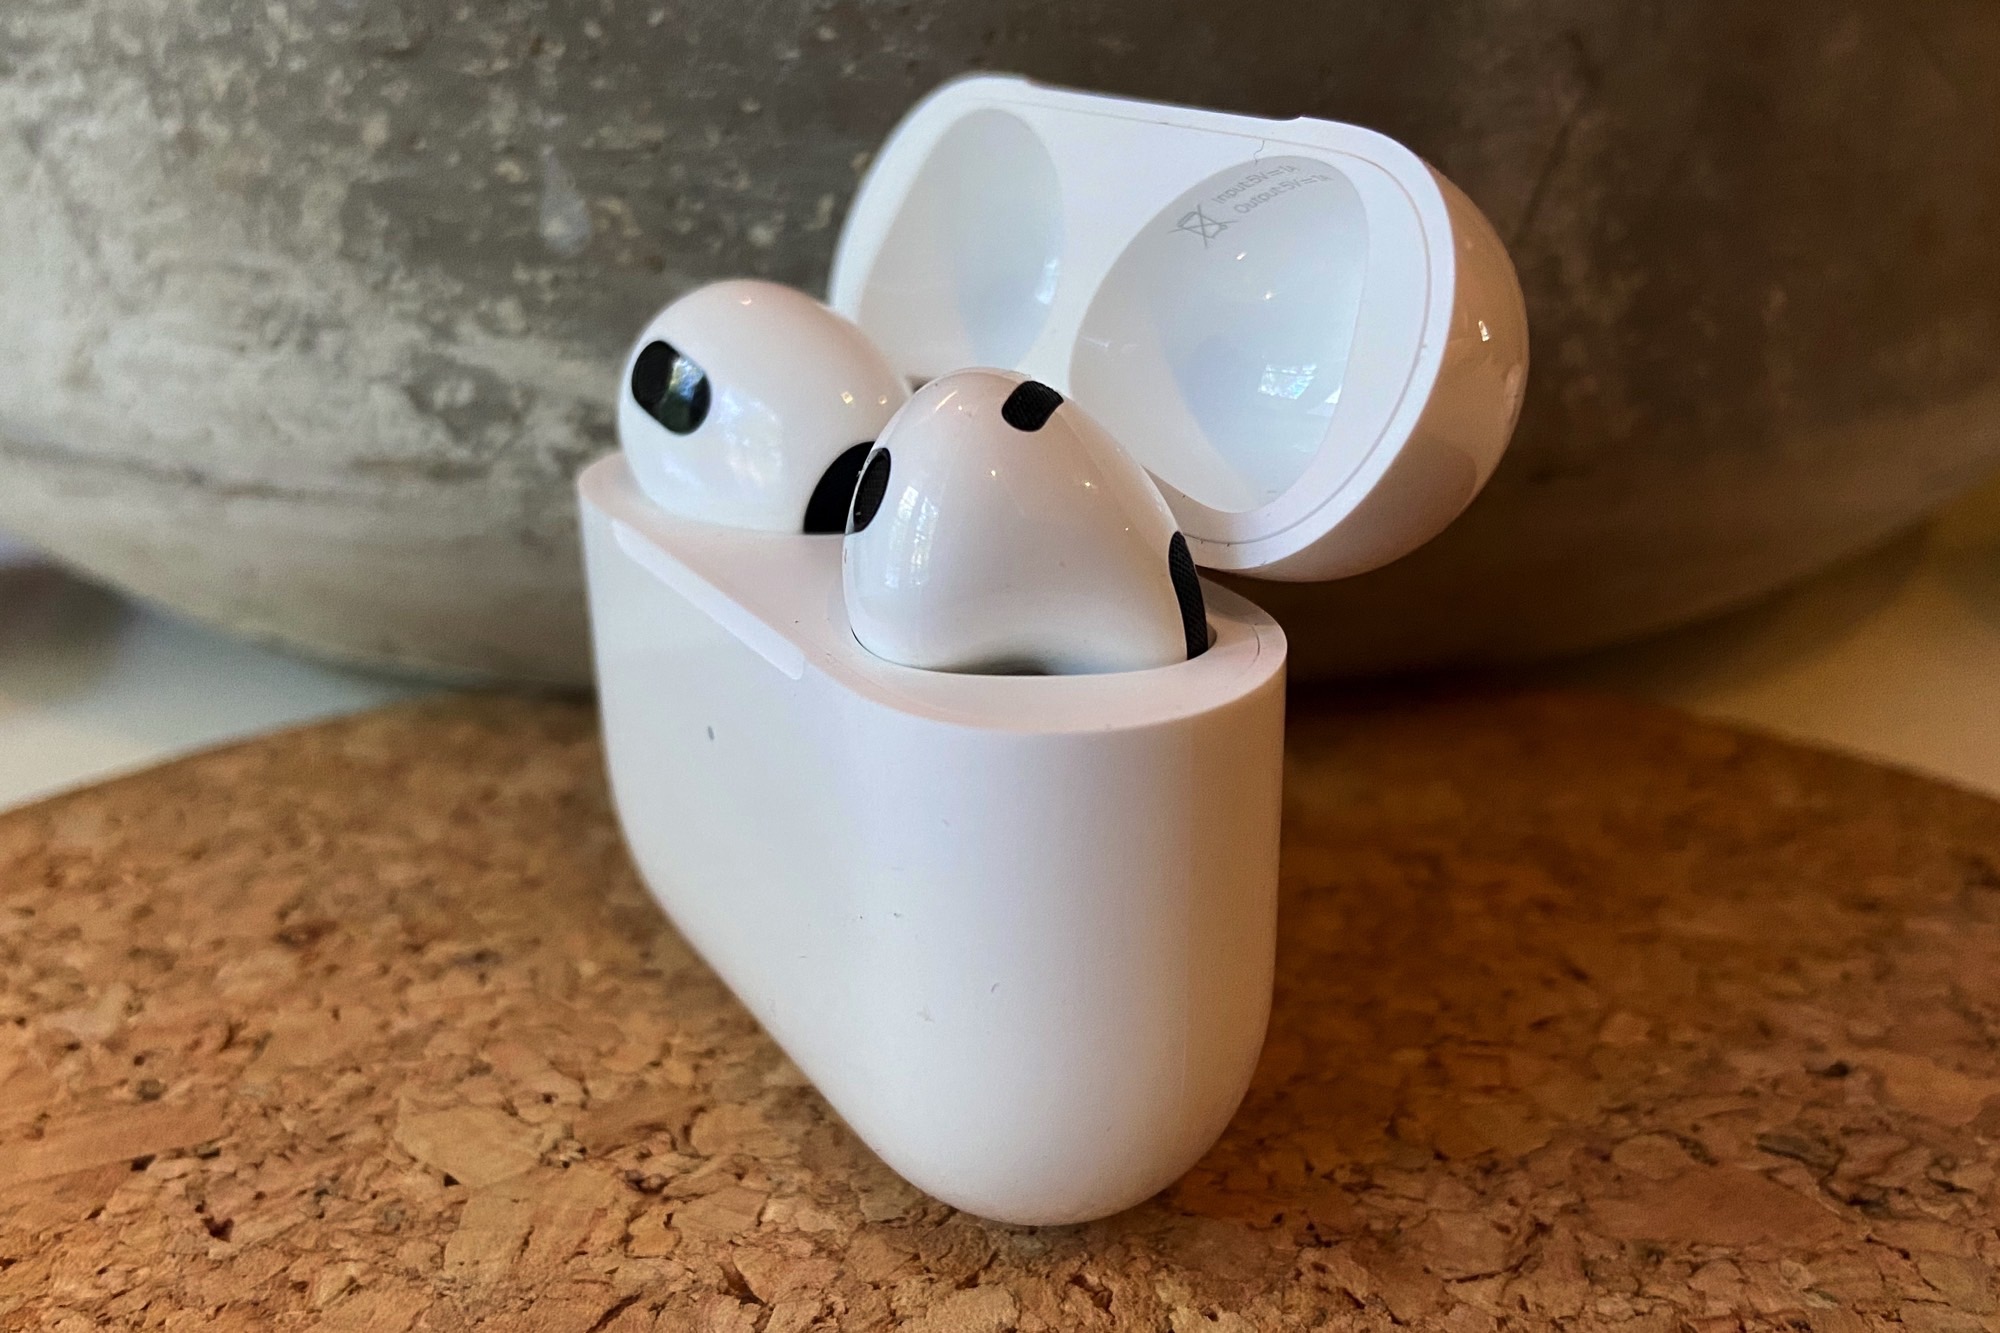 How to reset Apple AirPods and AirPods Pro